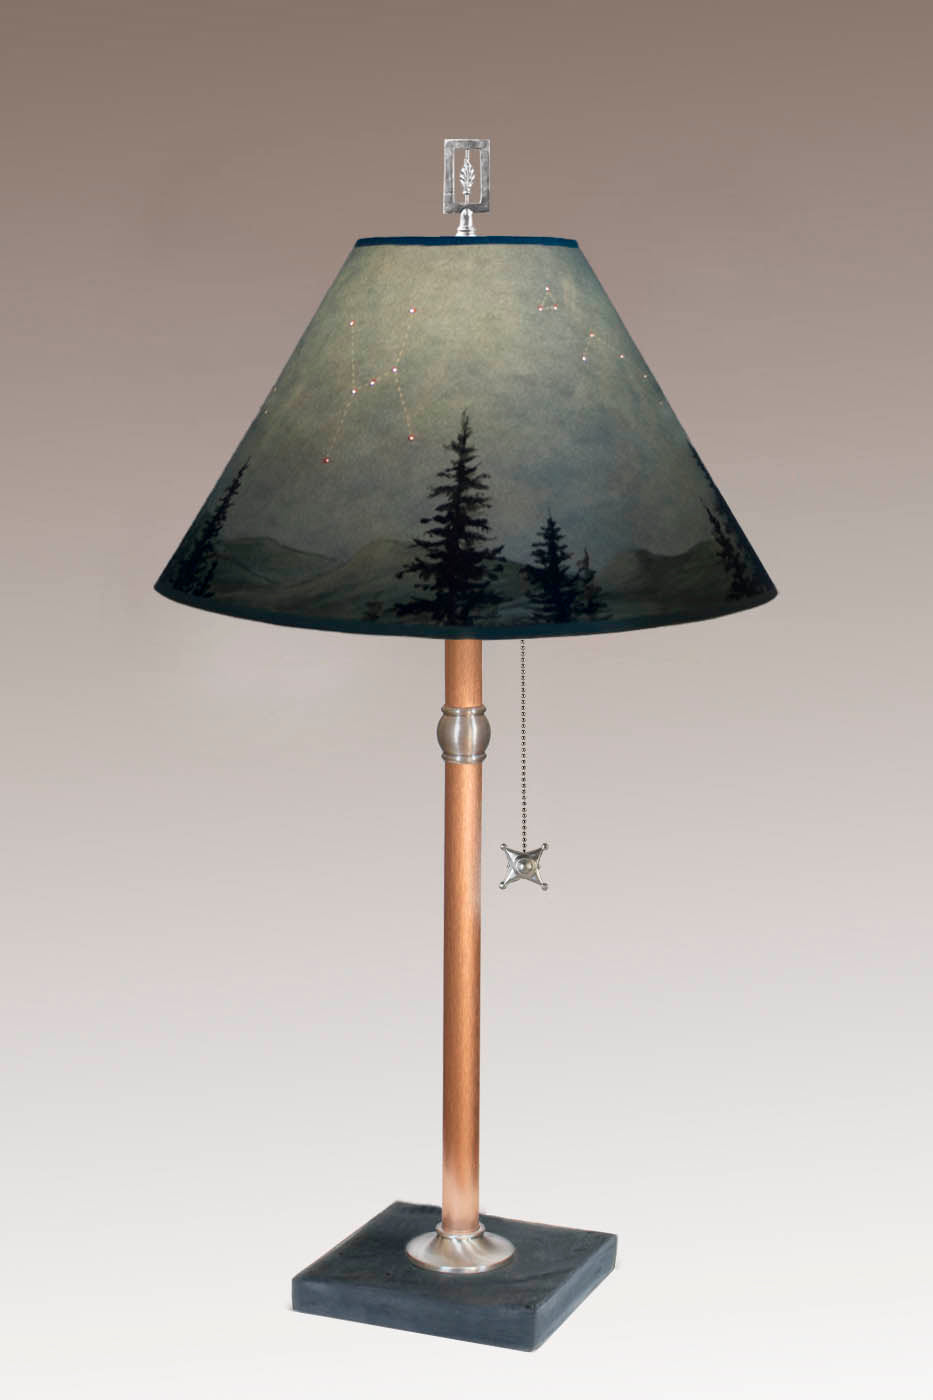 Janna Ugone &amp; Co Table Lamps Copper Table Lamp with Medium Conical Shade in Midnight Sky